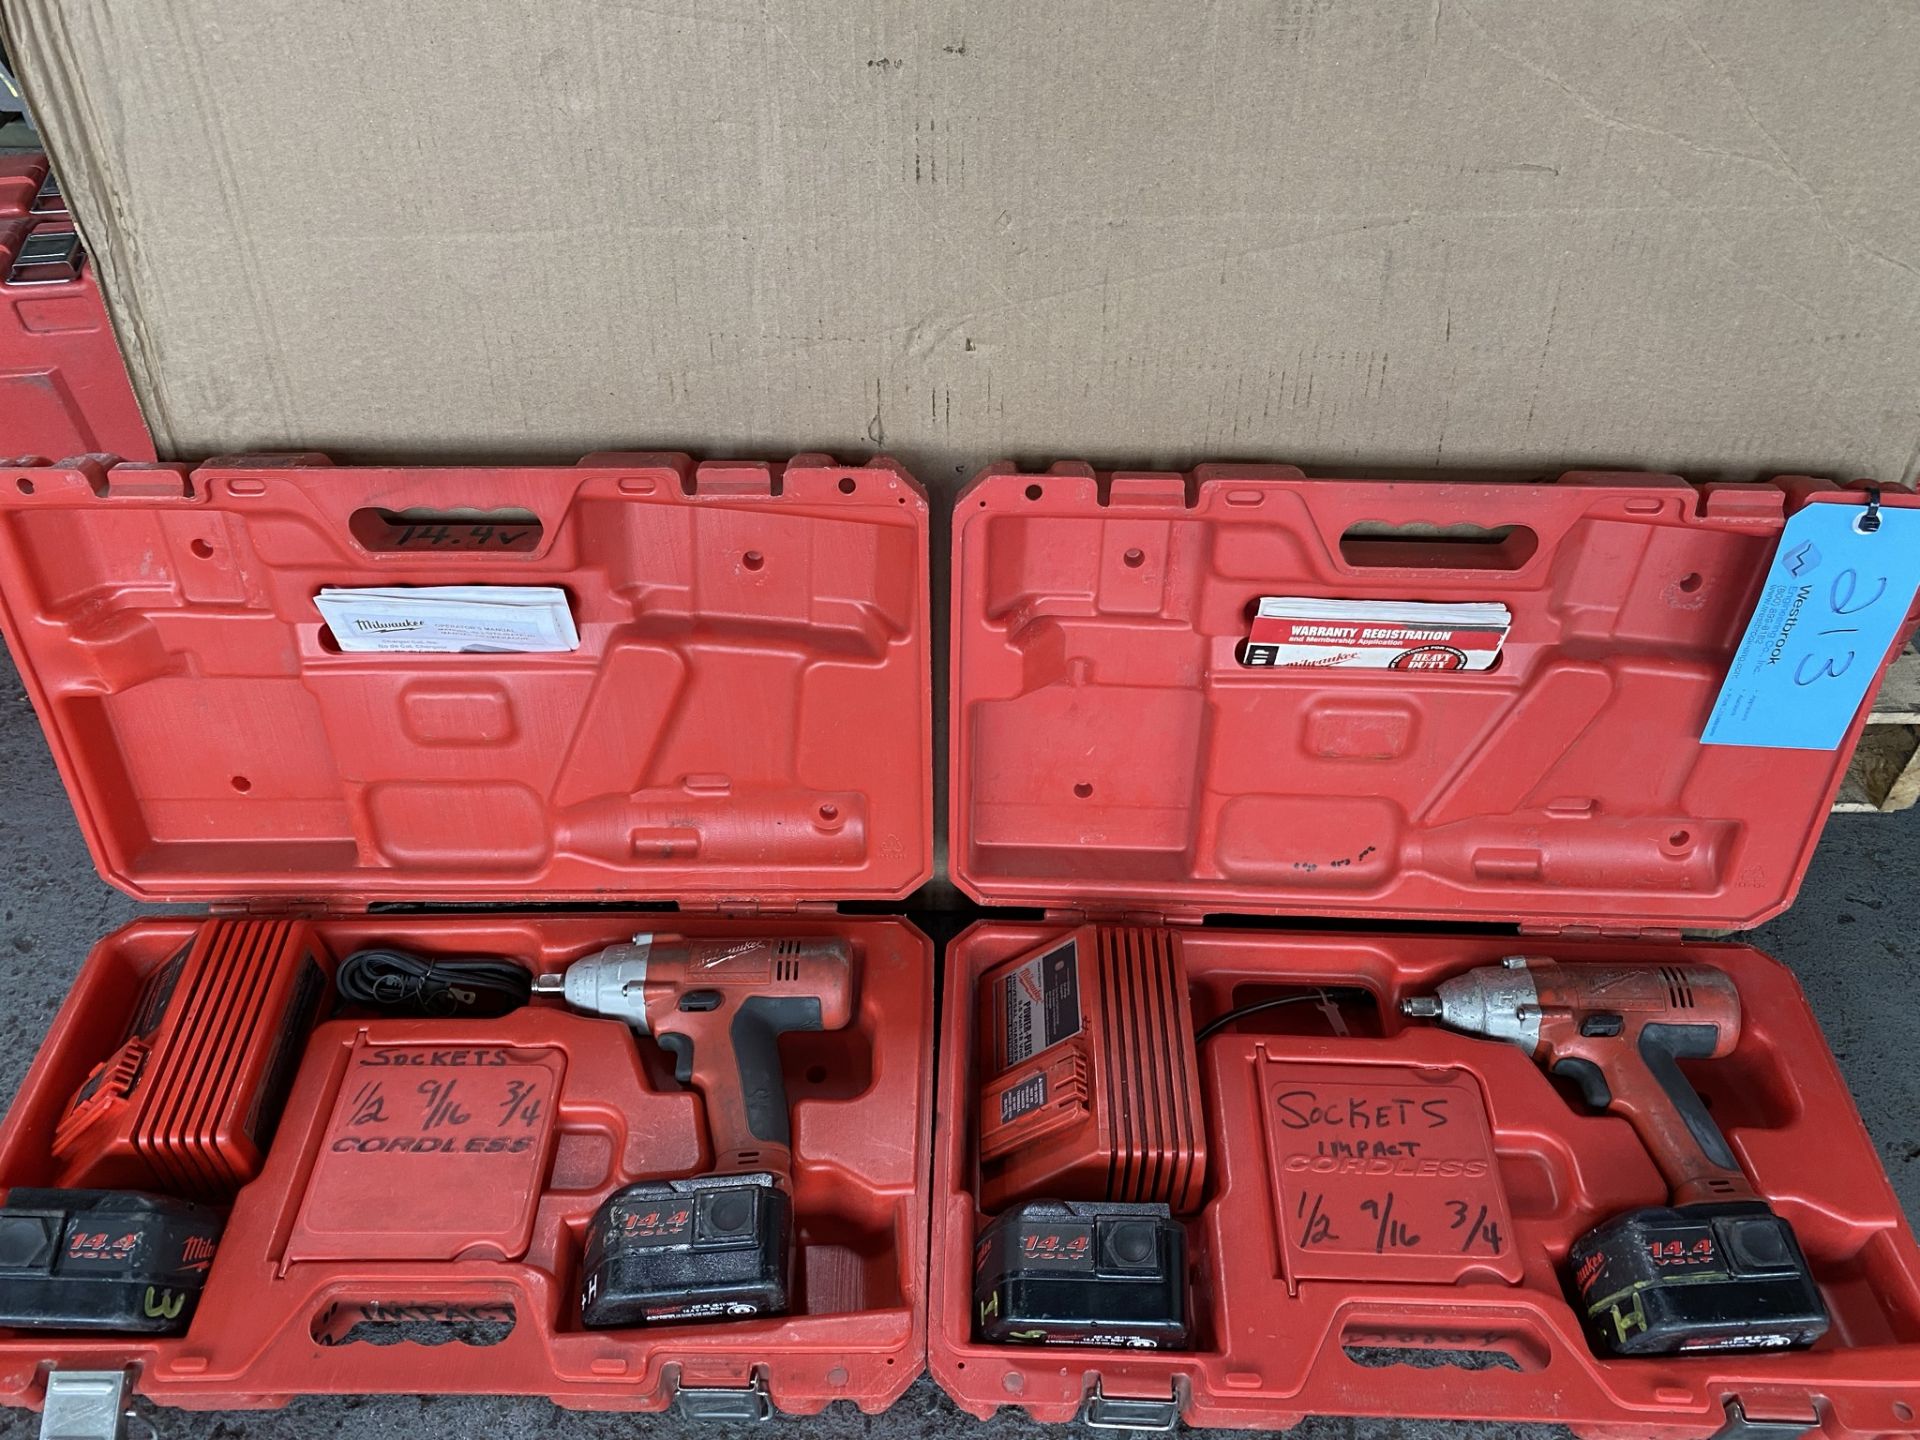 Lot of (2) Milwaukee 1/2" Cordless Impact Gun (Includes Carrying Case, 2 Batteries & Charger)